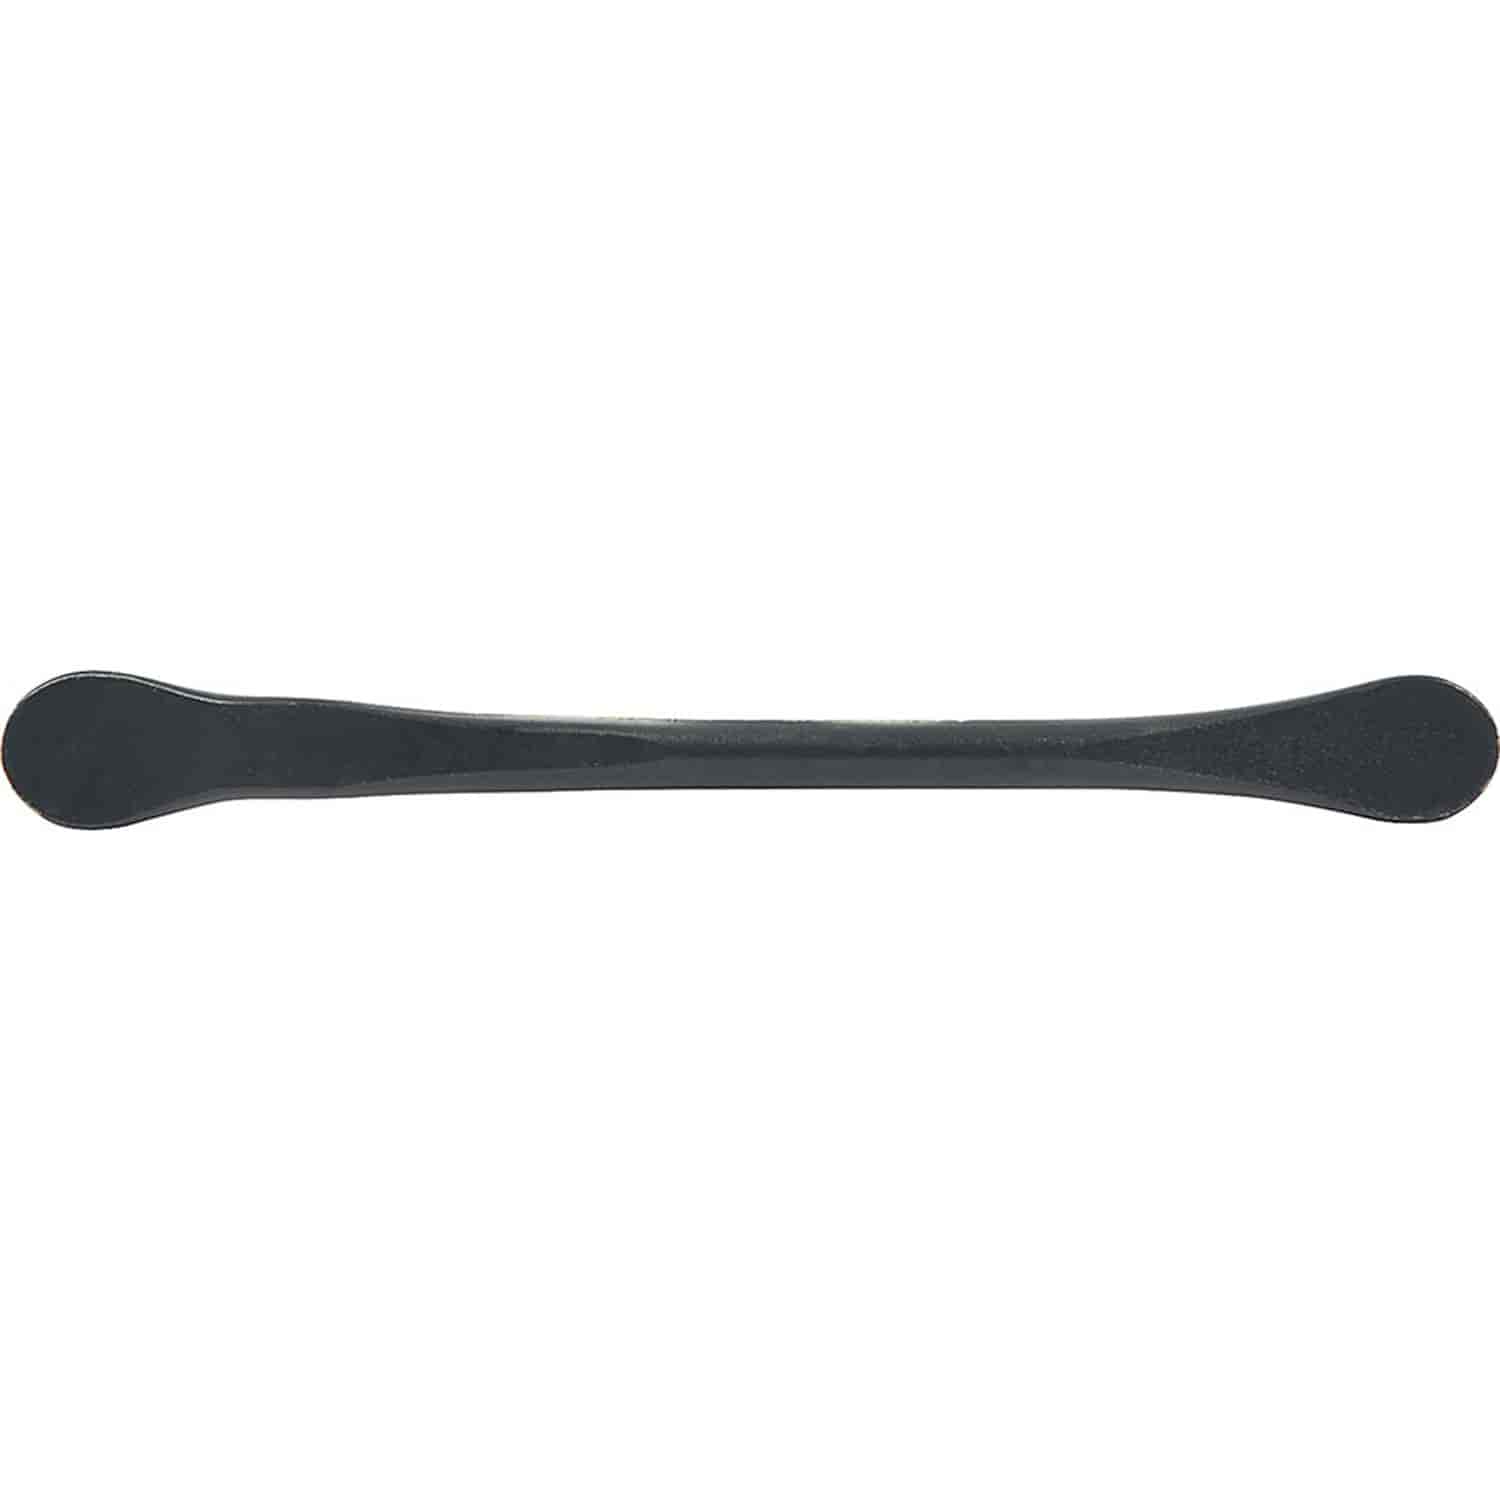 Tire Spoon 9" Curved With Round End